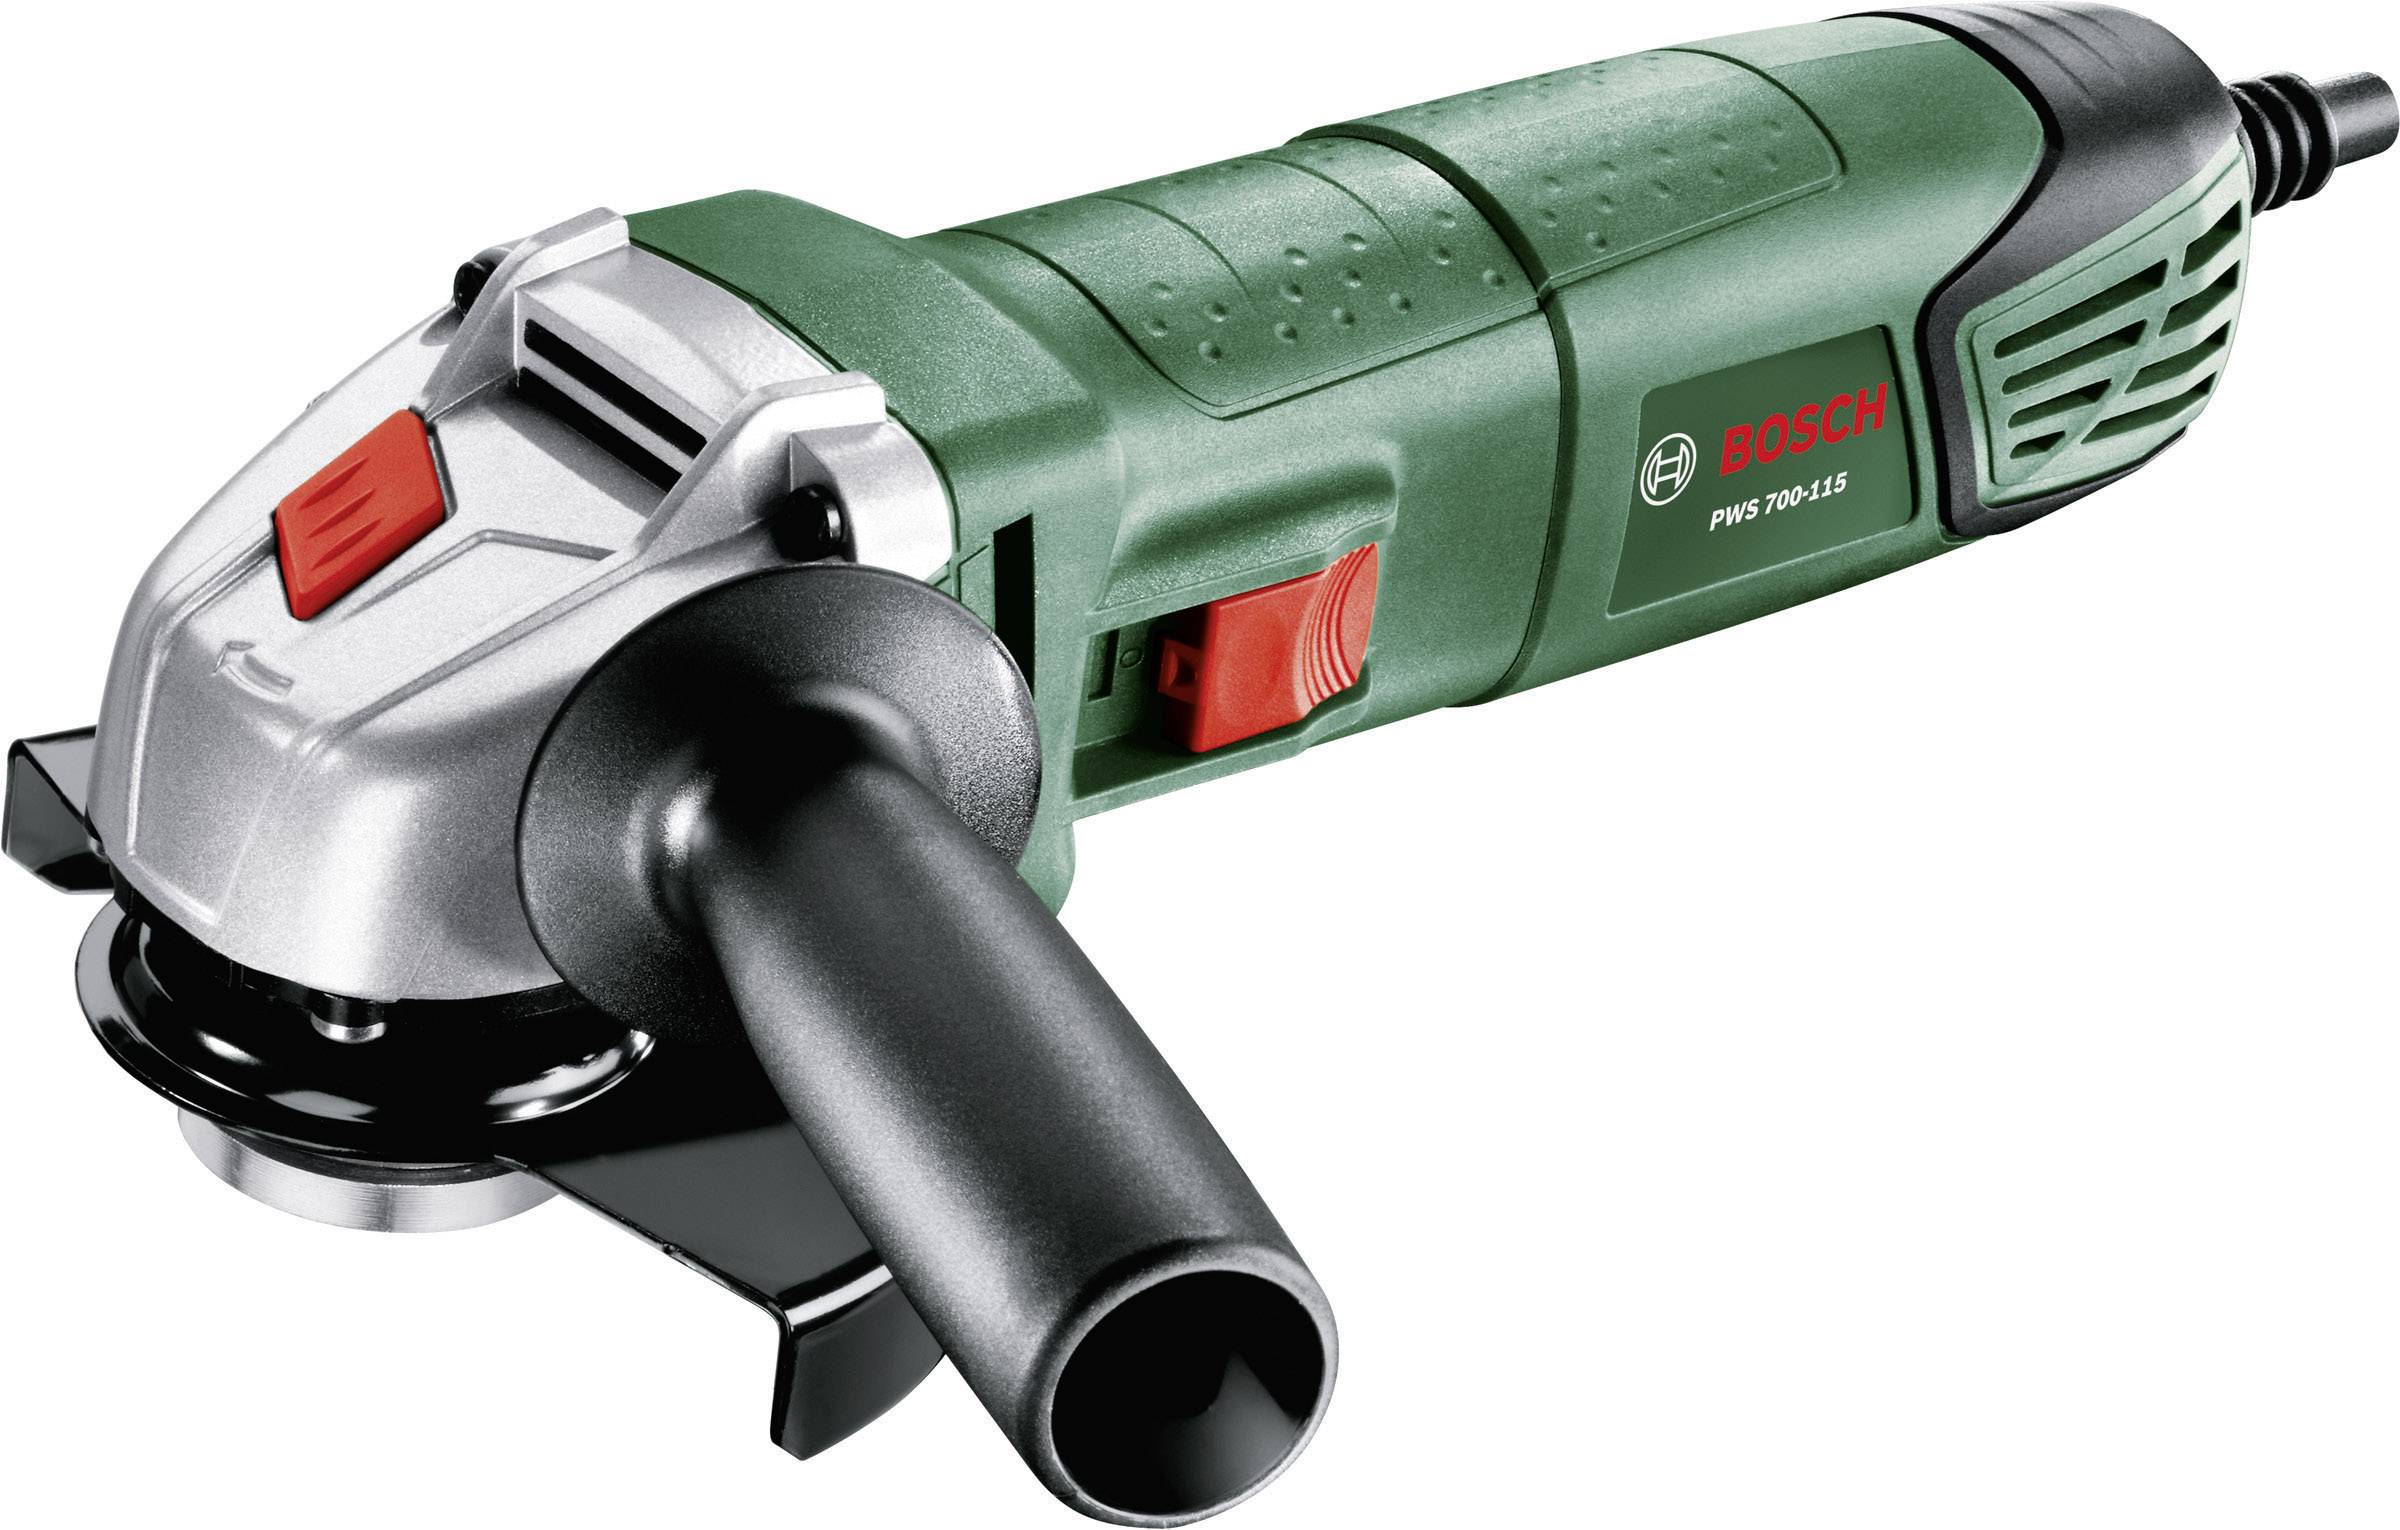 BOSCH PWS 700-115 ANGLE GRINDER 700W 